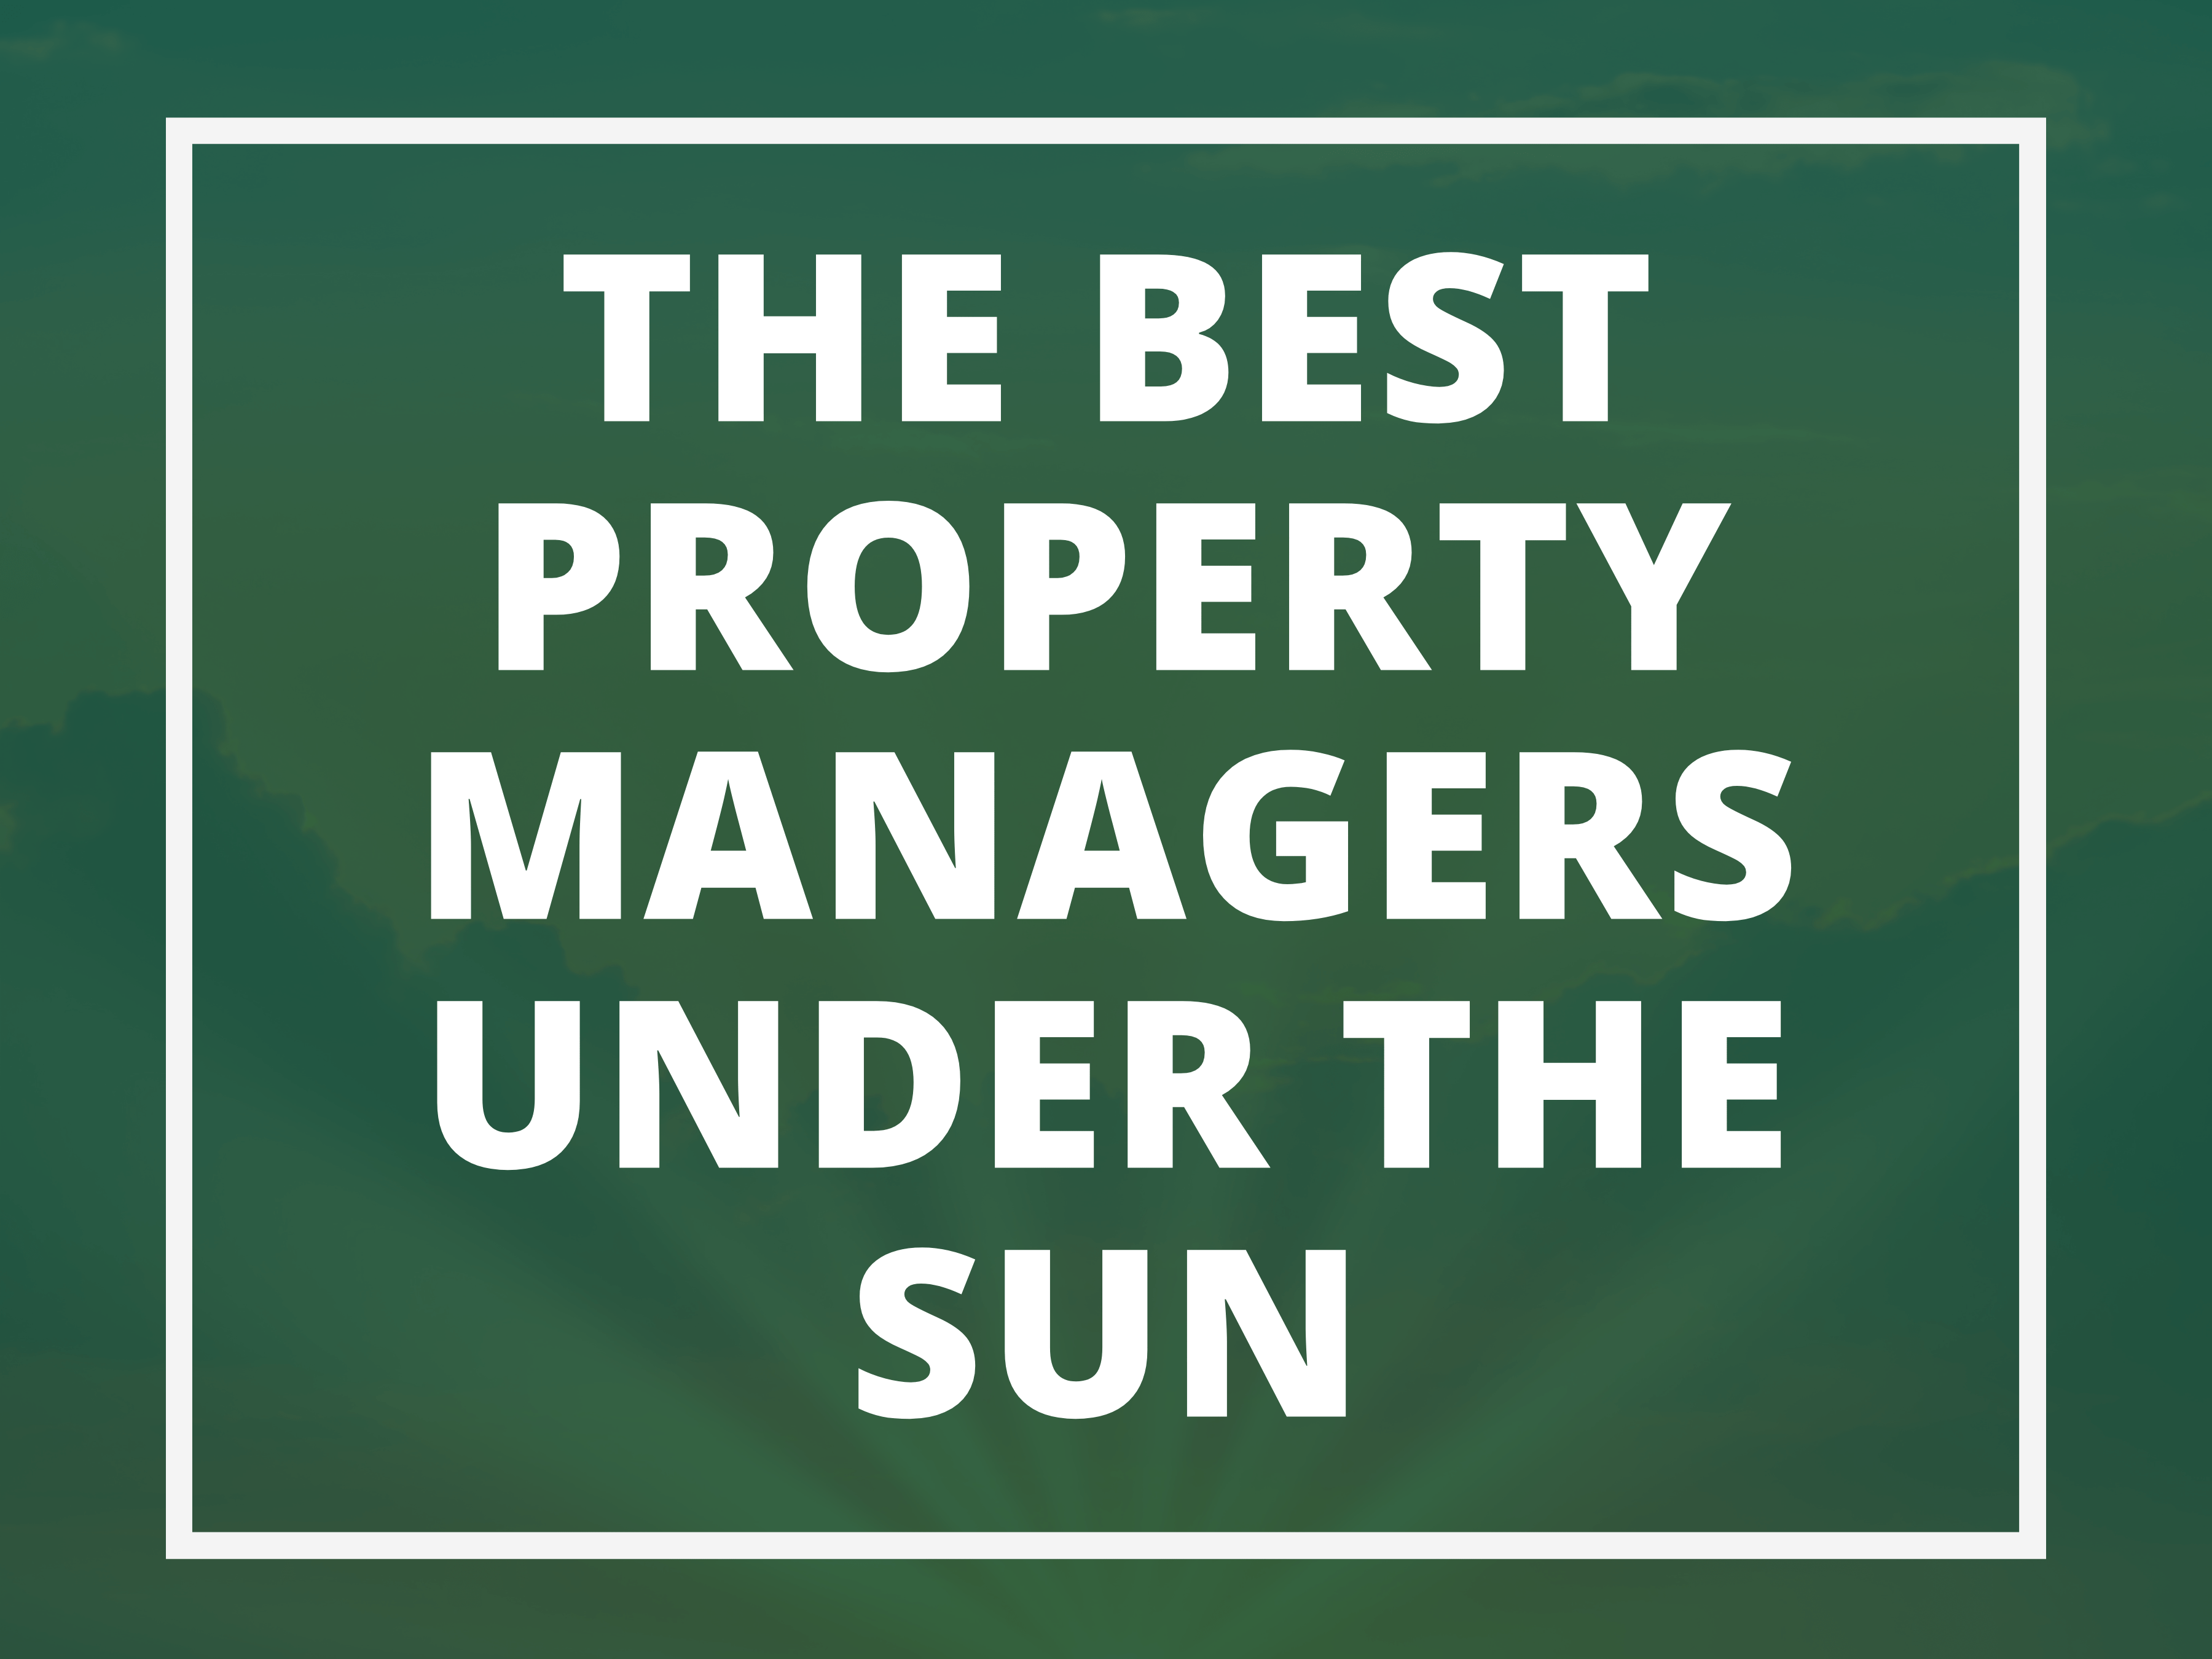 The Best Property Managers Under the Sun